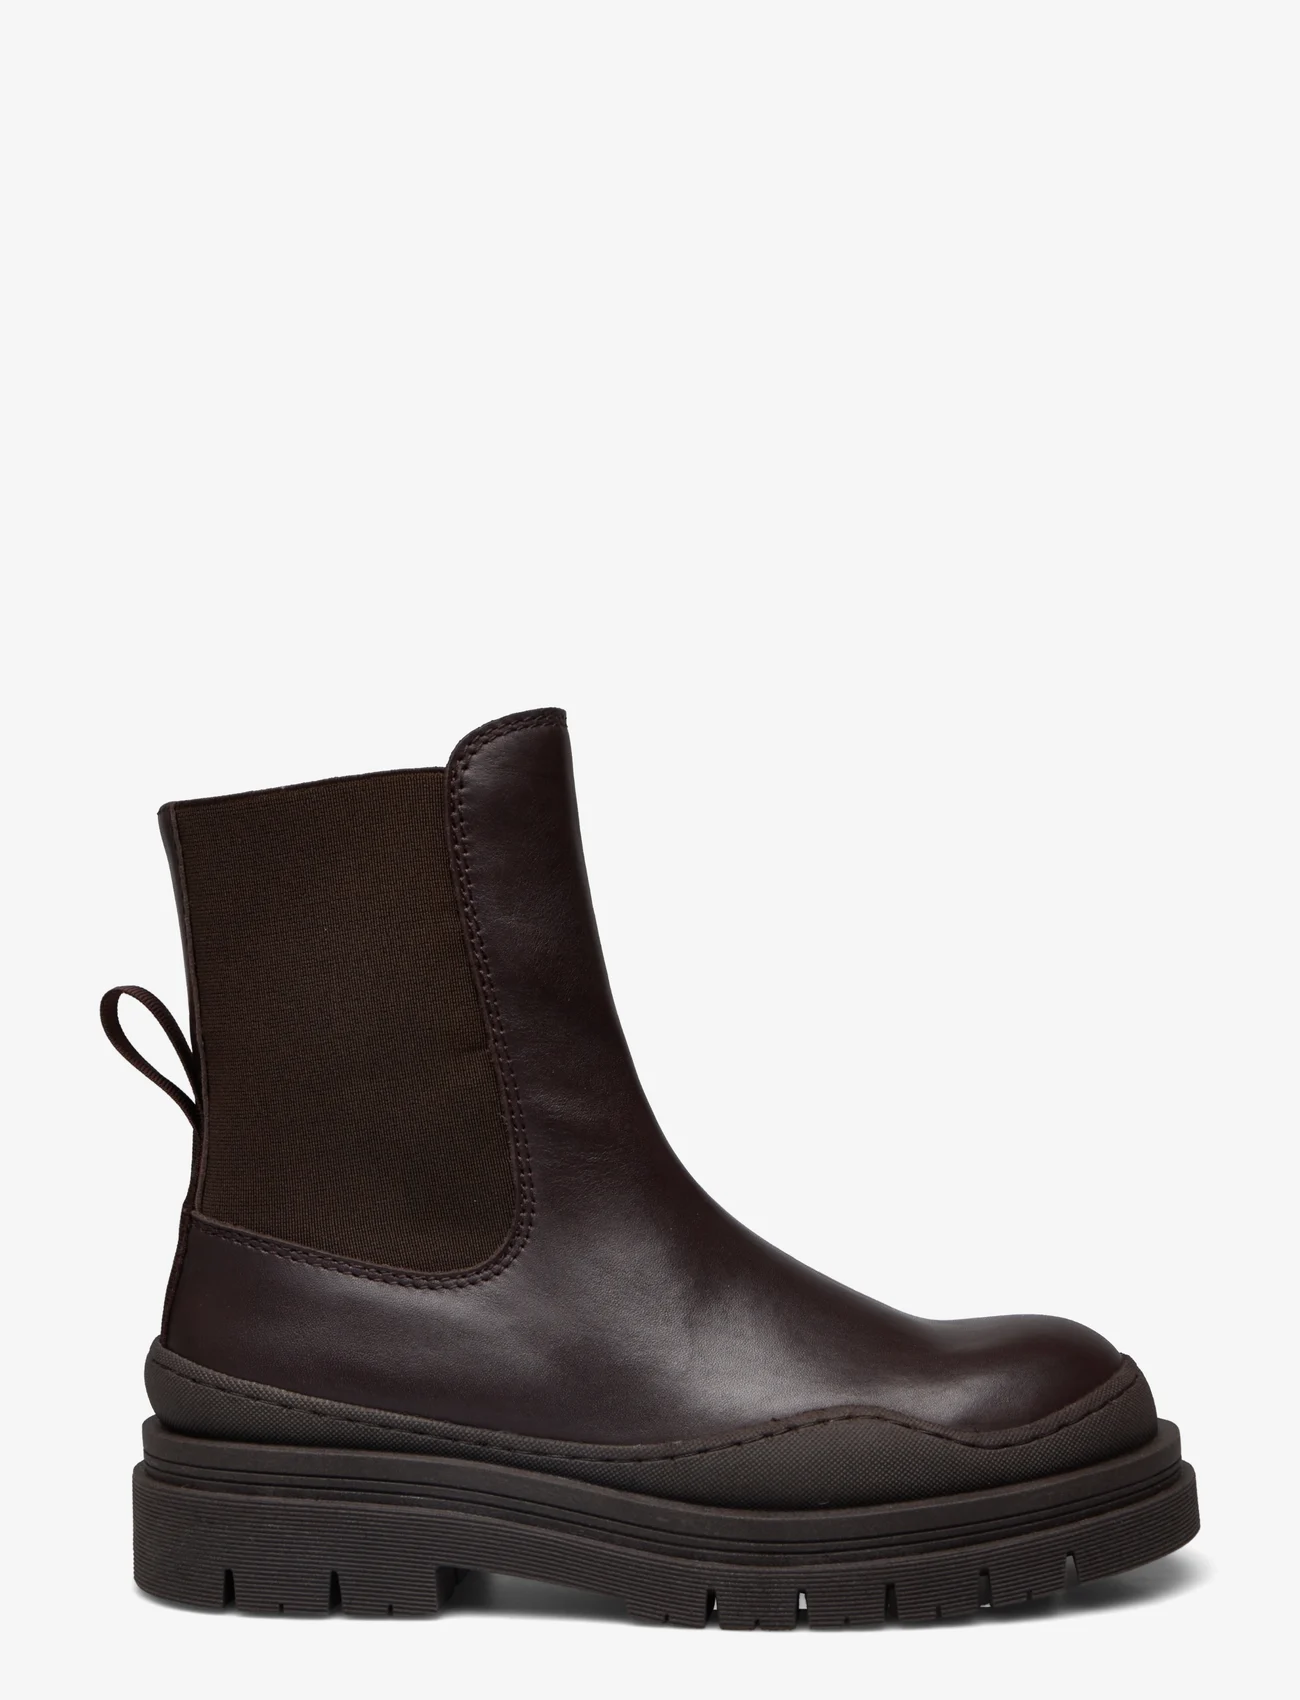 See by Chloé - ALLI ANKLE BOOT - chelsea boots - 501 dark brown - 1